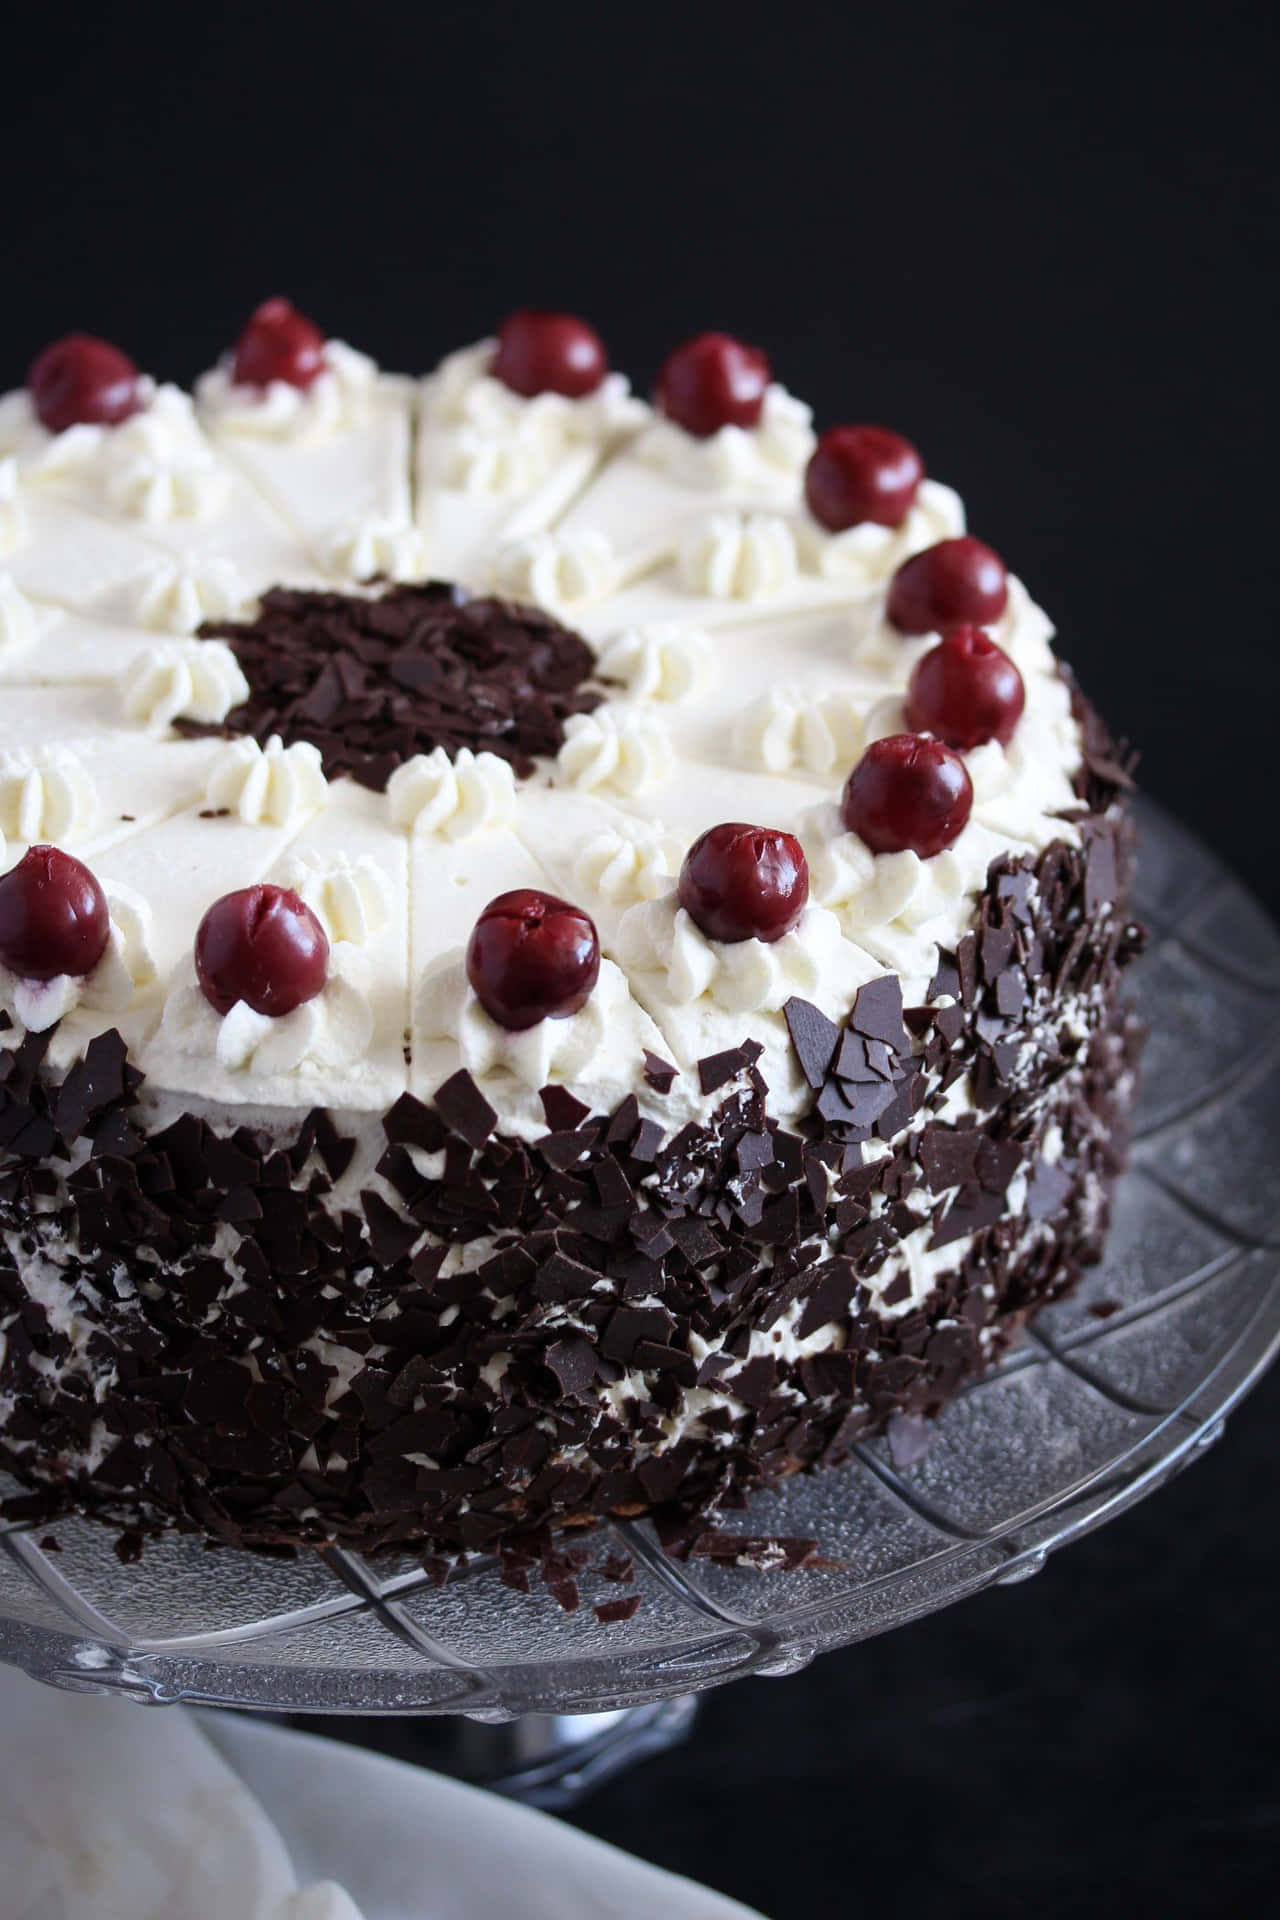 Enjoy the indulgence of this rich and decadent Black Forest Cake Wallpaper